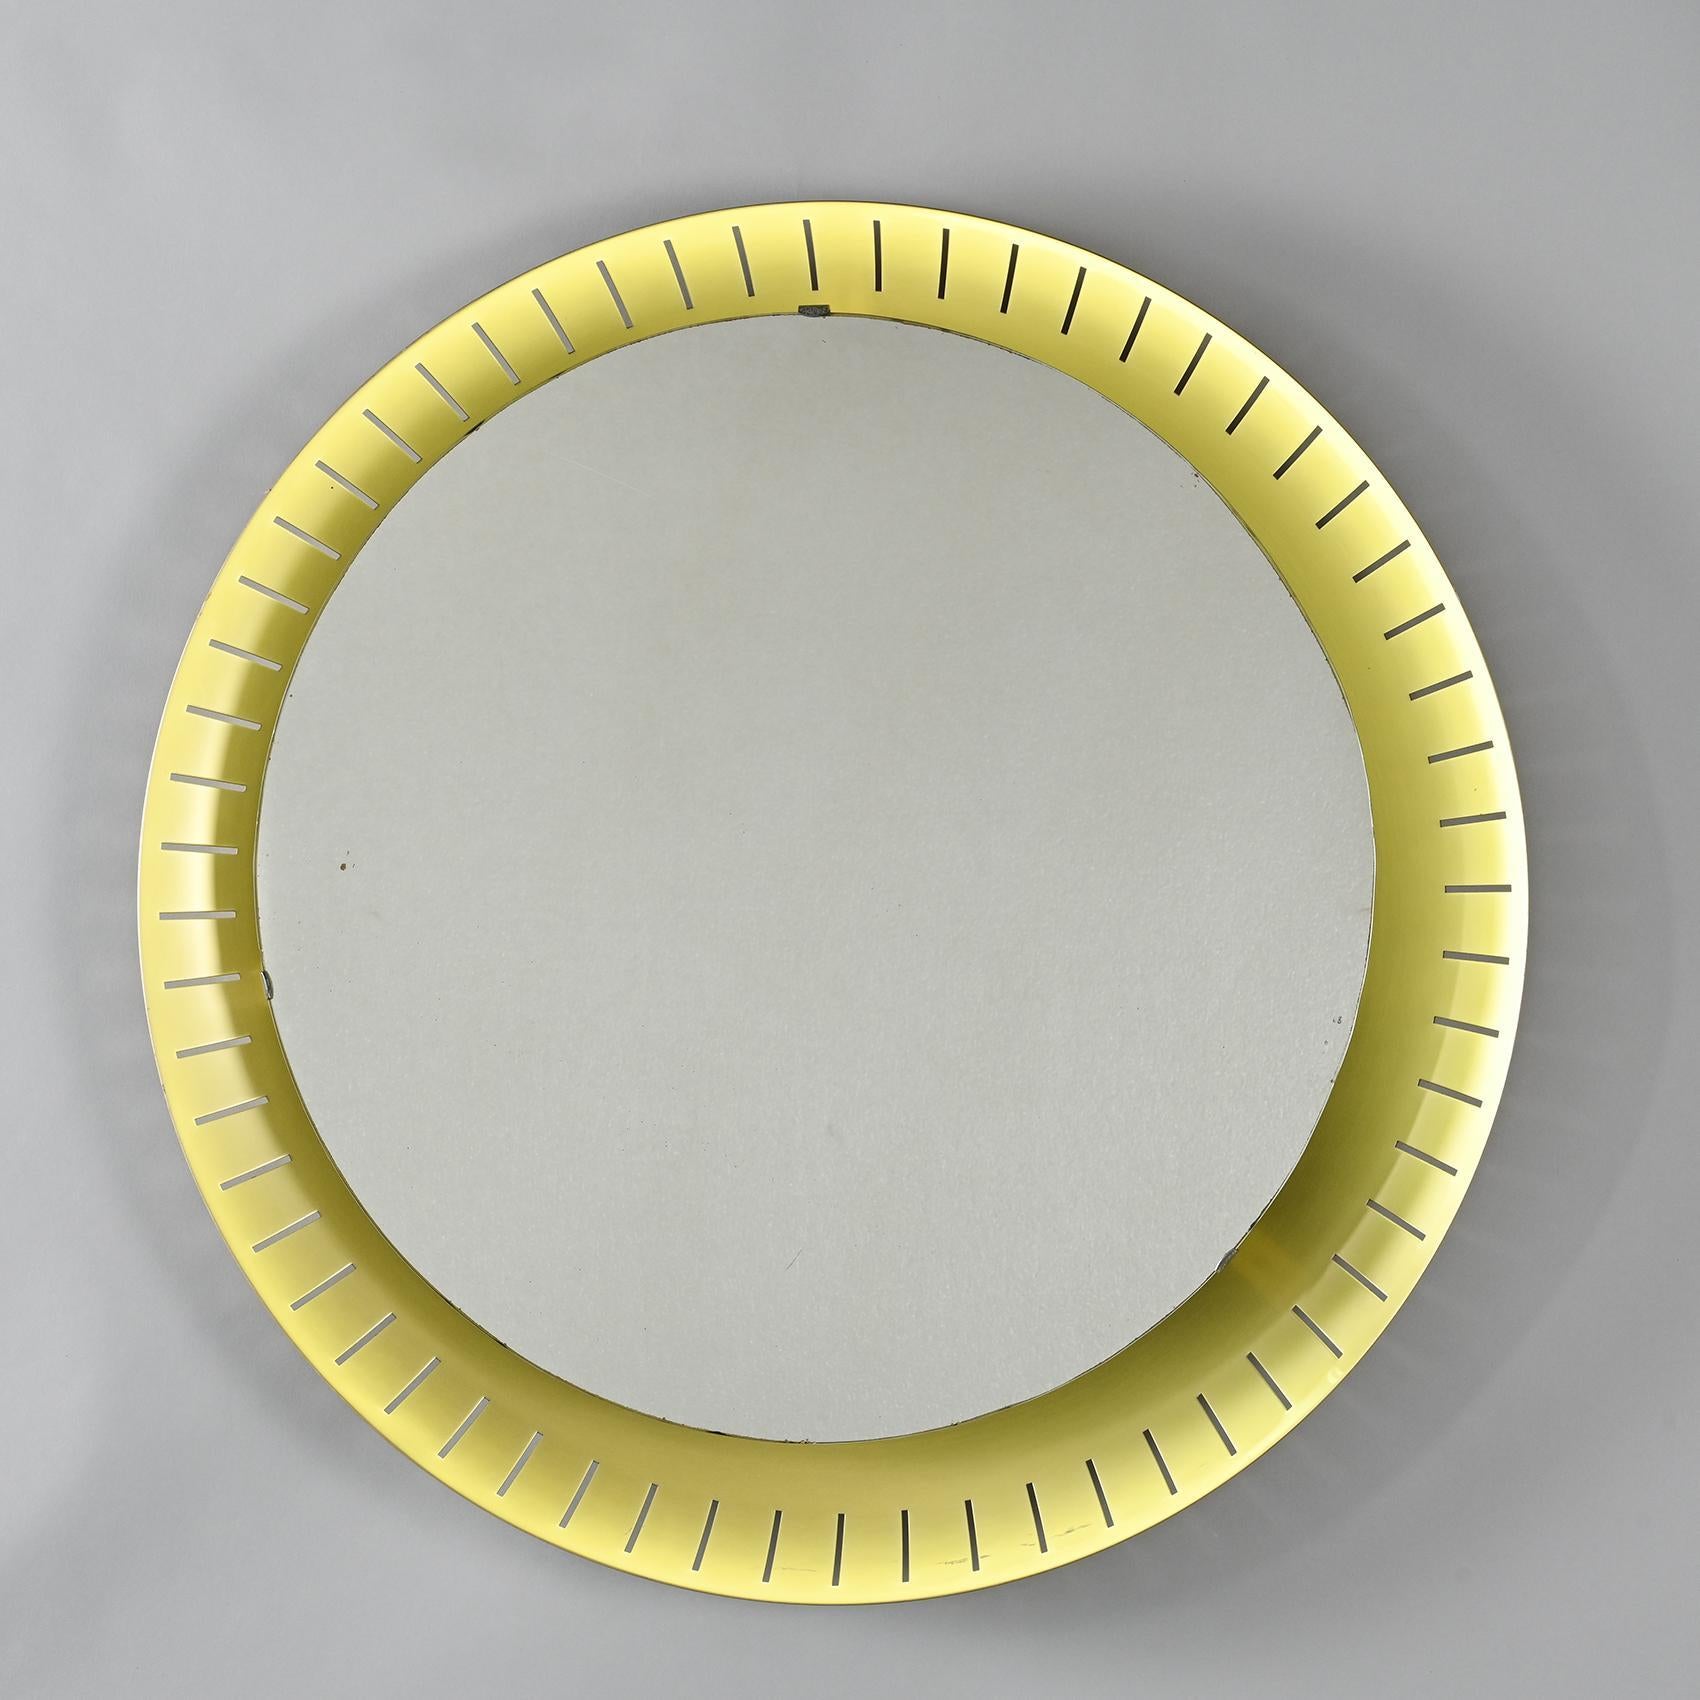 Fall for the timeless elegance of this round backlit mirror crafted by Stilnovo, a lighting house founded by Bruno Gatta in Milan in 1946.

Its contour, made of anodized perforated aluminum, delicately frames the mirror. The backlighting, thanks to